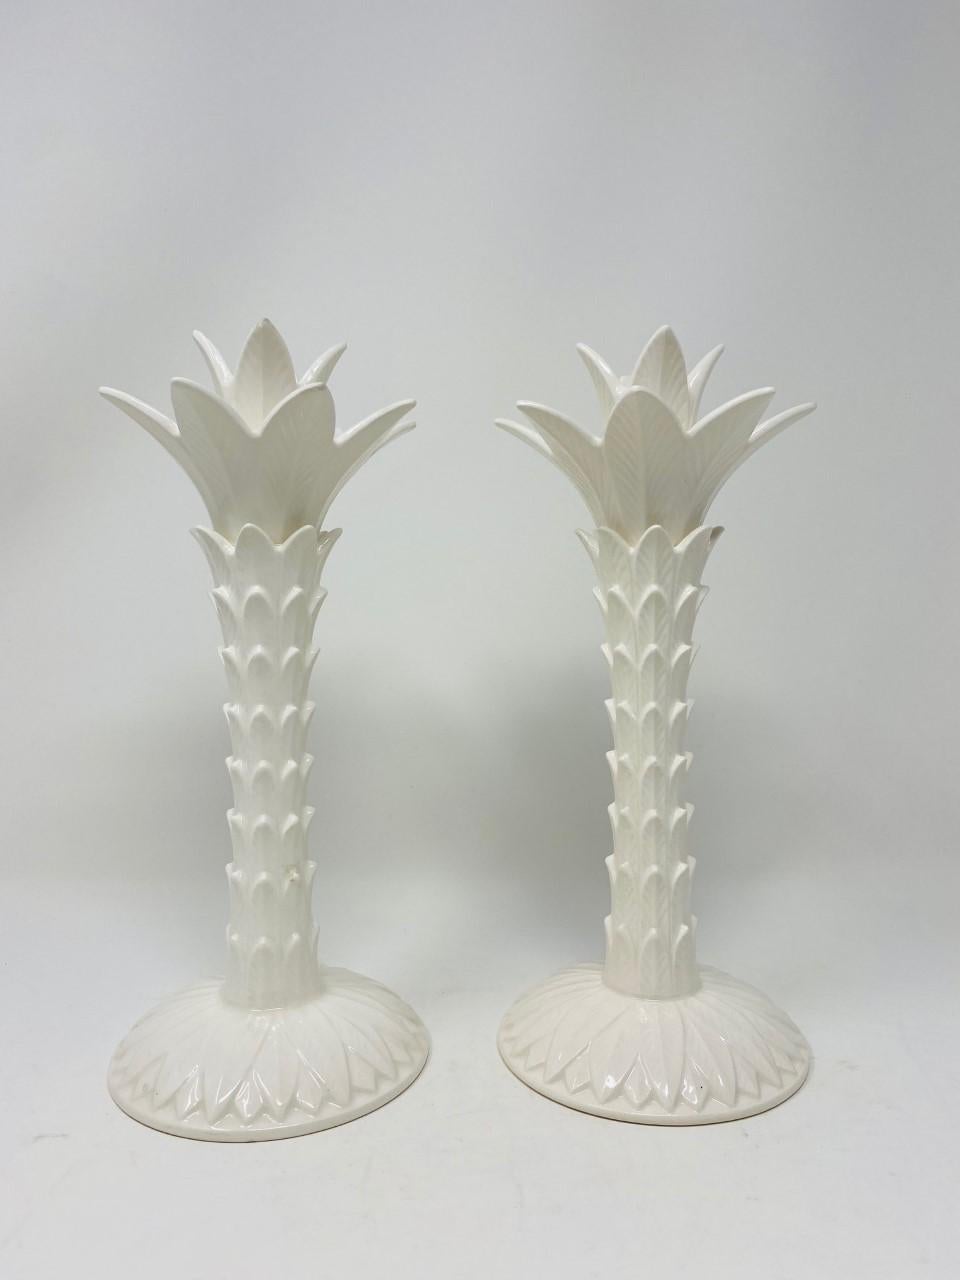 English Mid Century Fitz and Floyd Porcelain Chinoiserie Palm Tree Candle Holders Pair